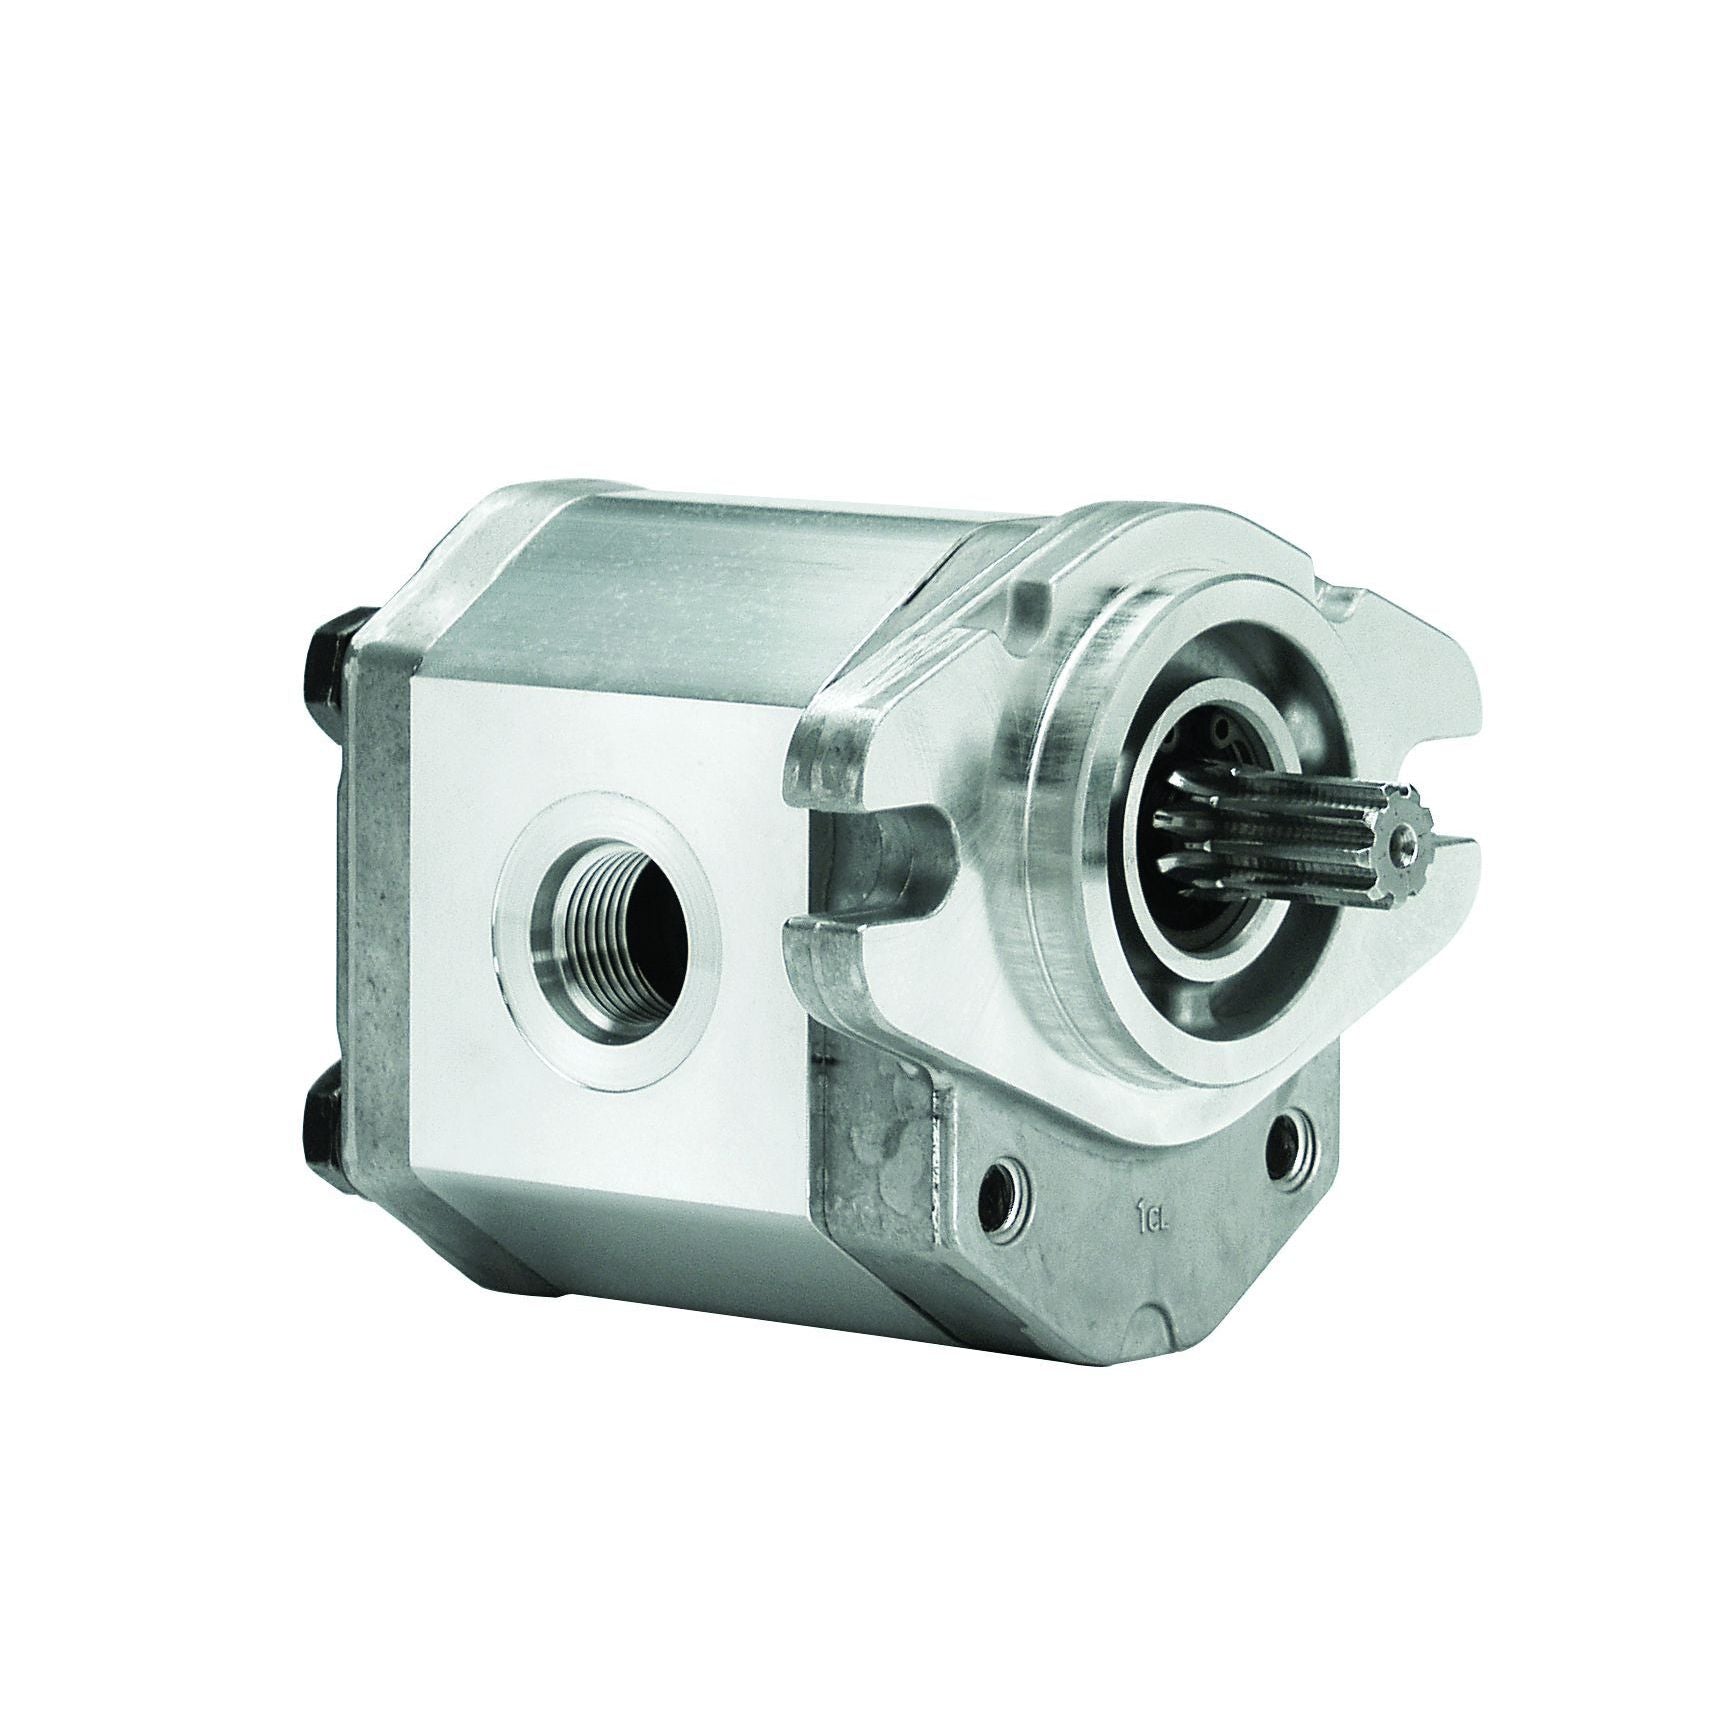 ALP2A-S-16-S1 : Marzocchi Gear Pump, CCW, 11.5cc (0.7015in3), 5.47 GPM, 3335psi, 4000 RPM, #12 SAE (3/4") In, #10 SAE (5/8") Out, Splined Shaft 9T 16/32DP, SAE A 2-Bolt Mount